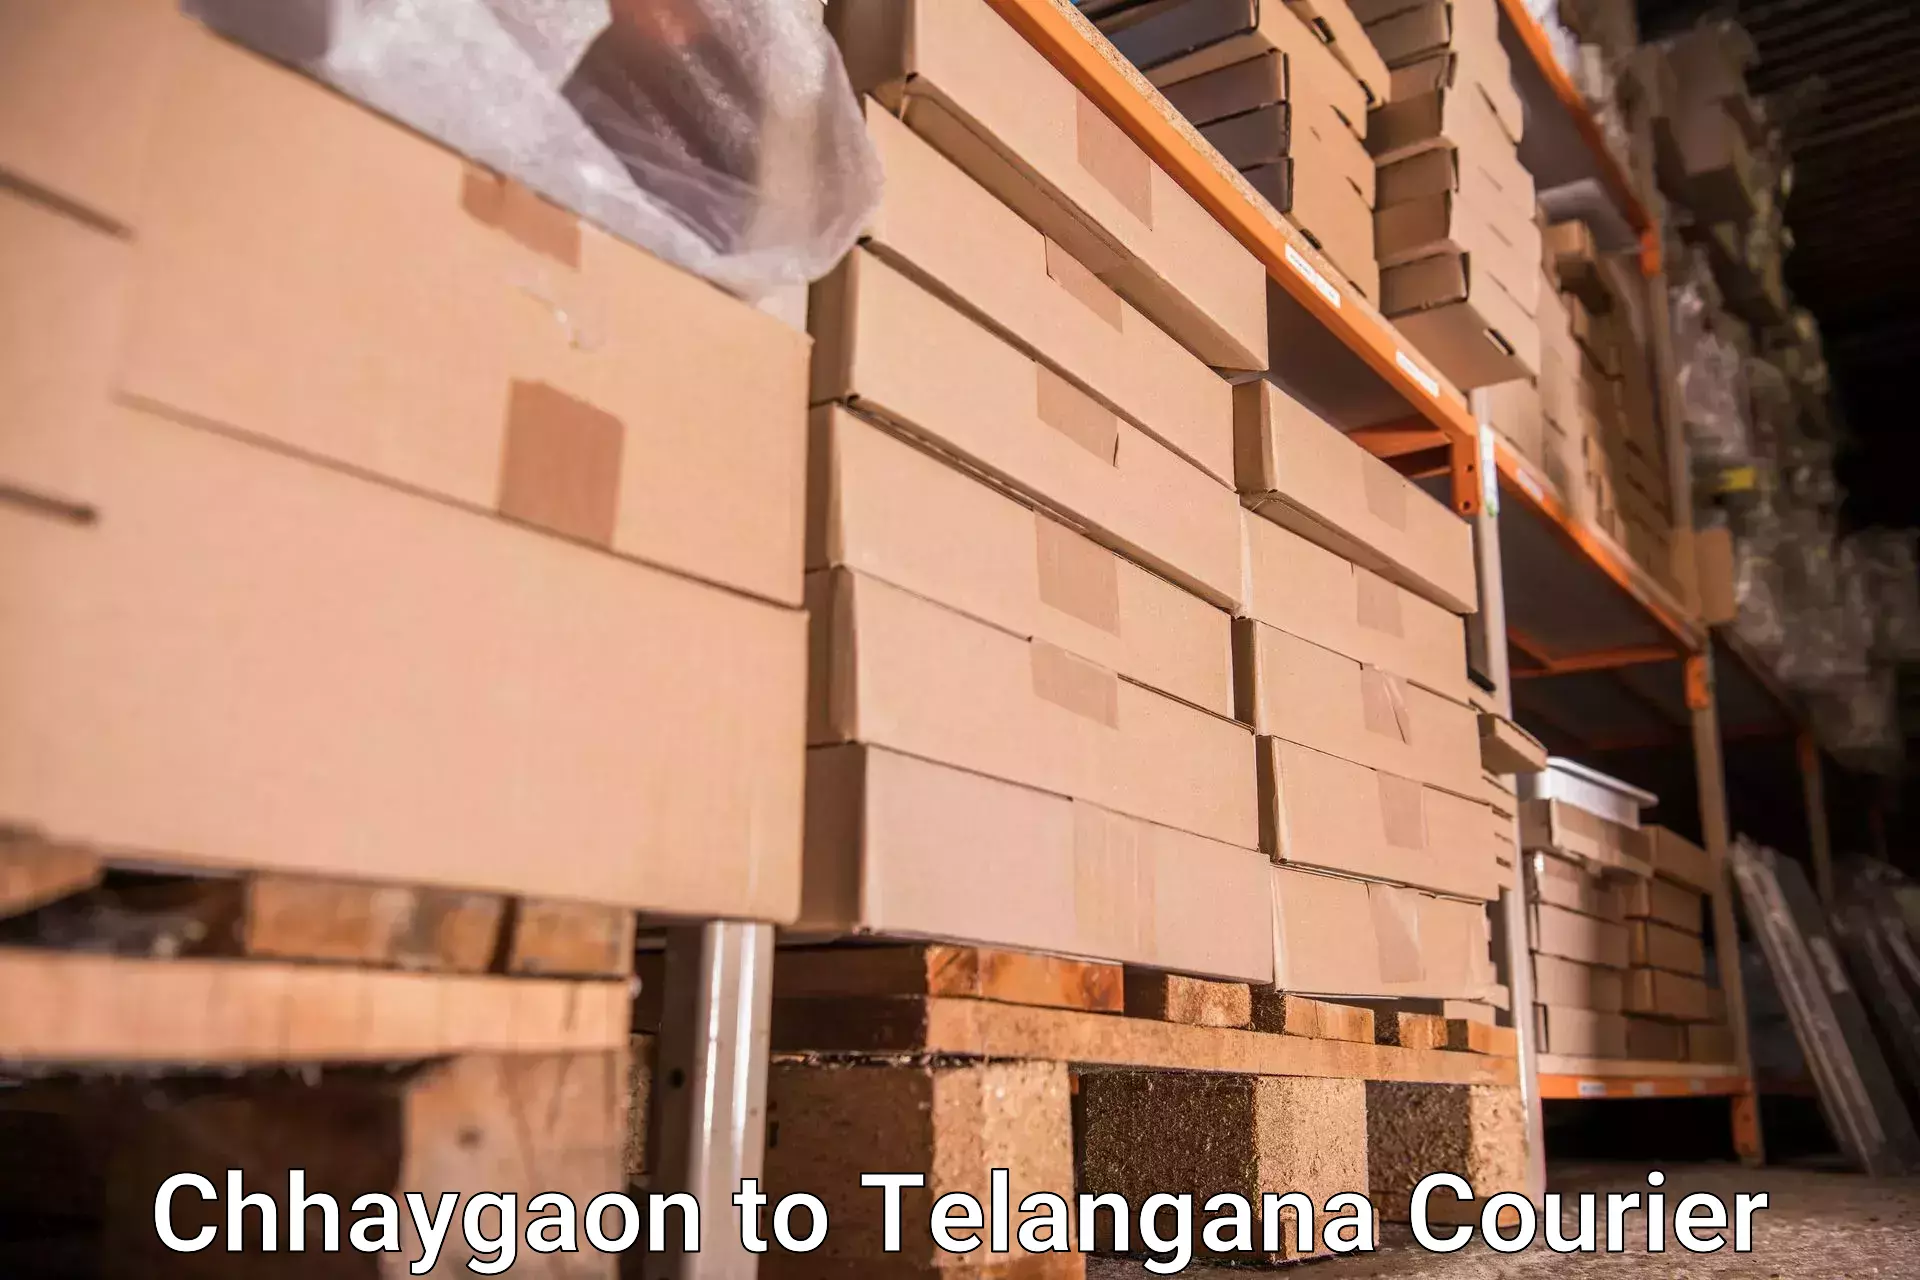 Rural baggage transport Chhaygaon to Khairatabad